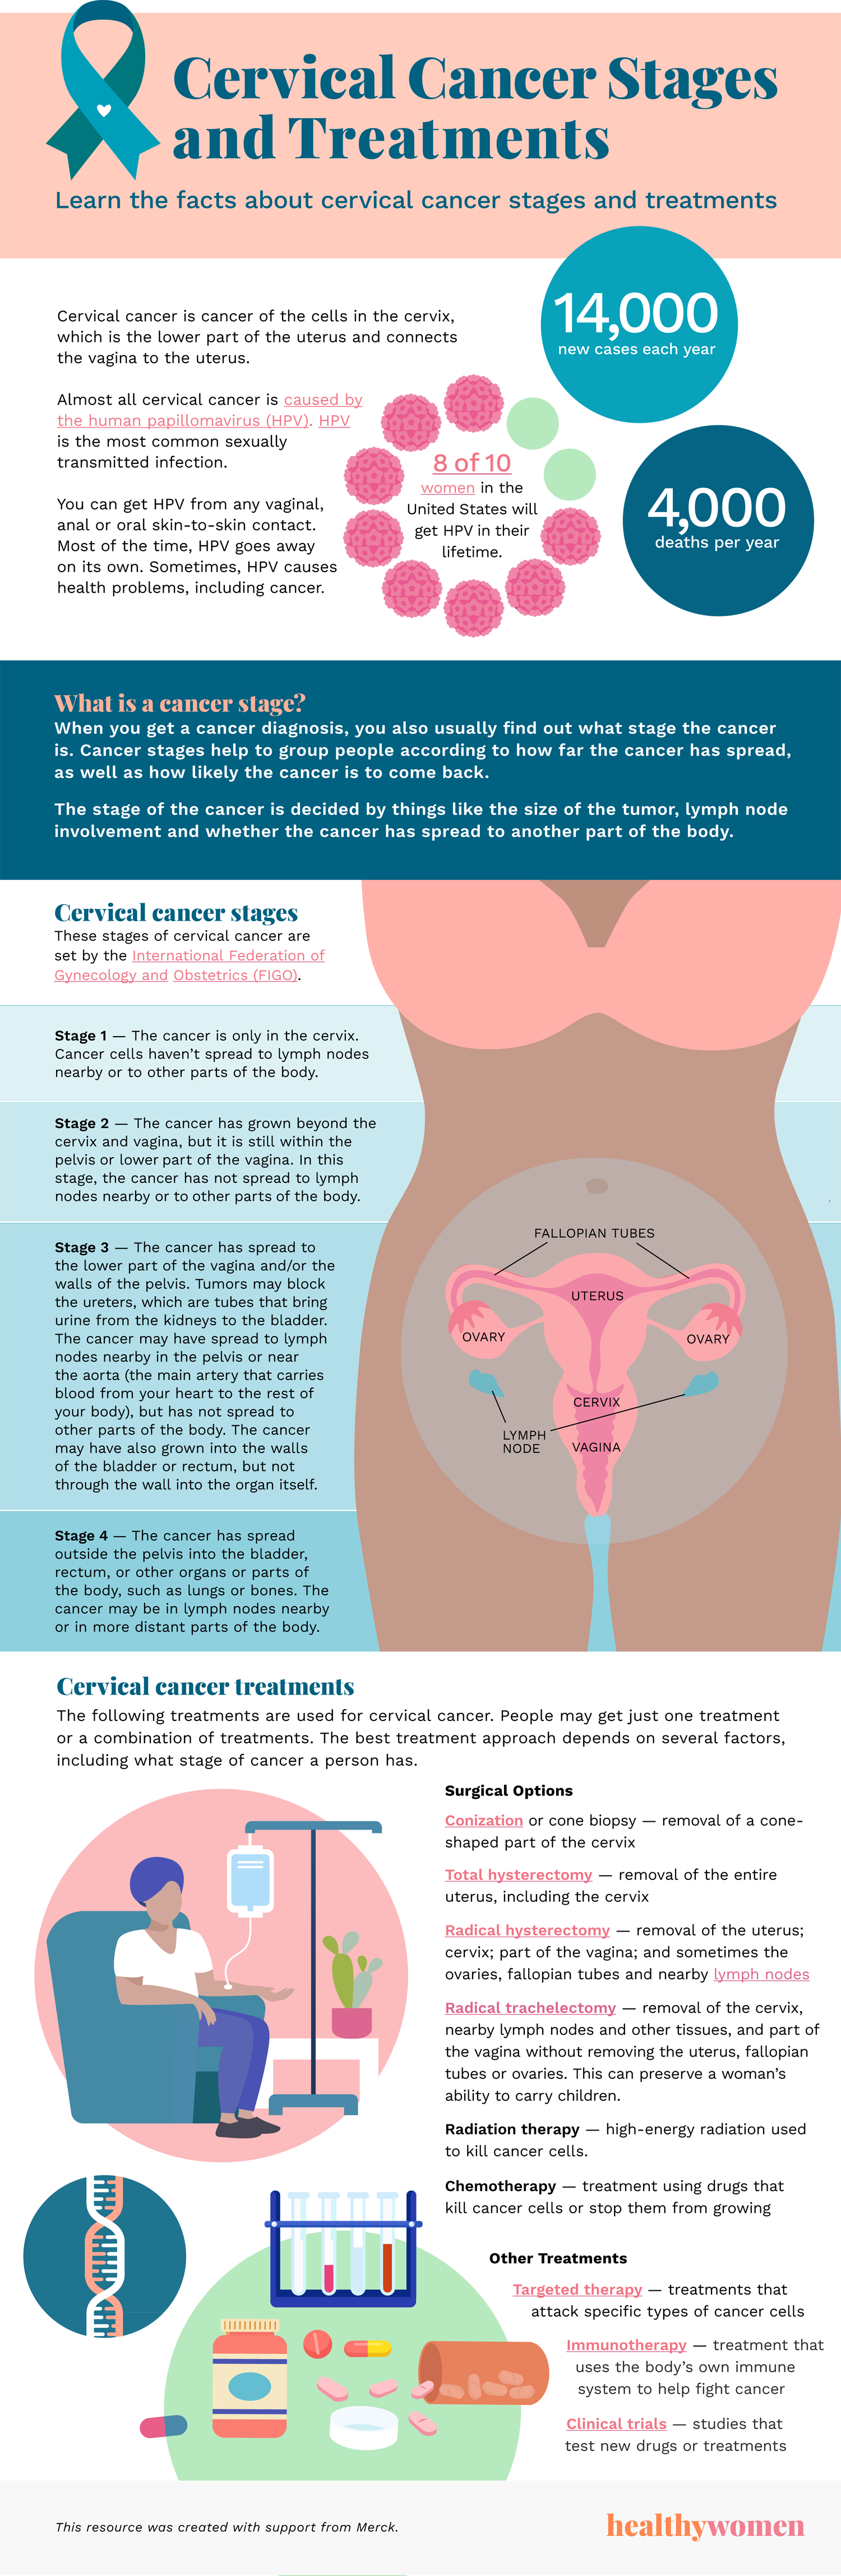 Infographic Cervical Cancer Stages and Treatments. Click the image to open the PDF